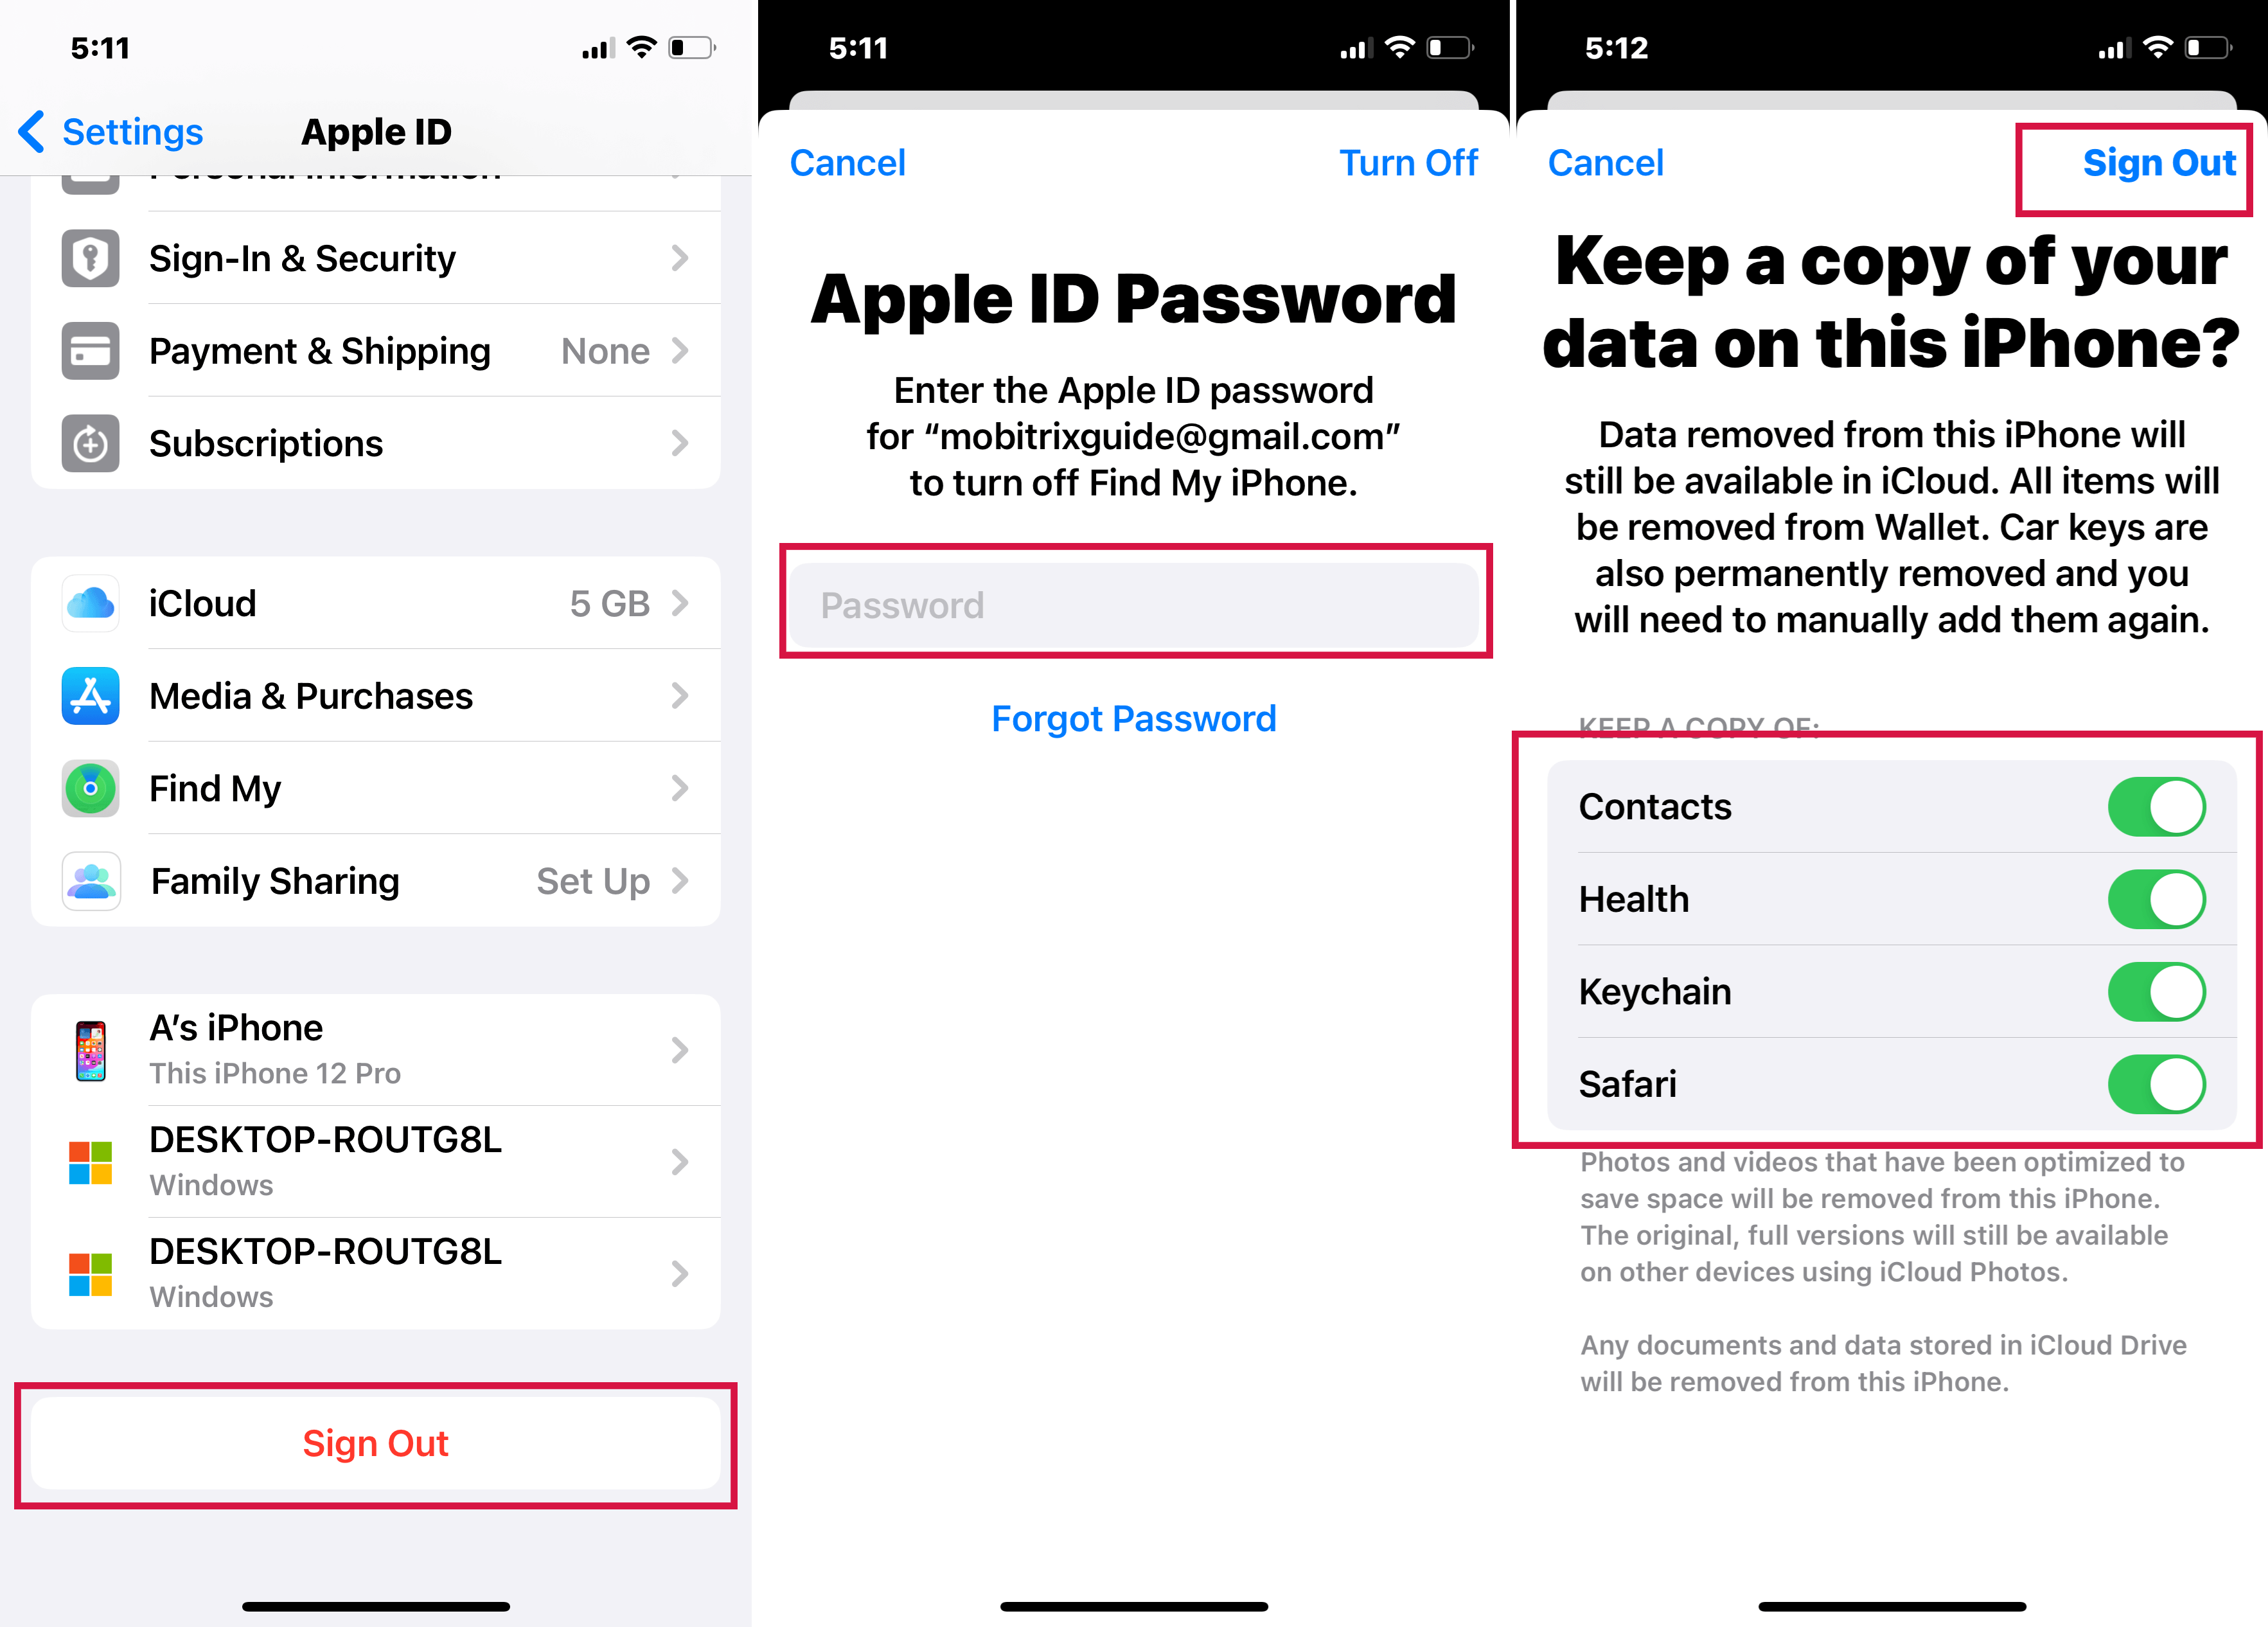 Sign out of your Apple ID in the Settings